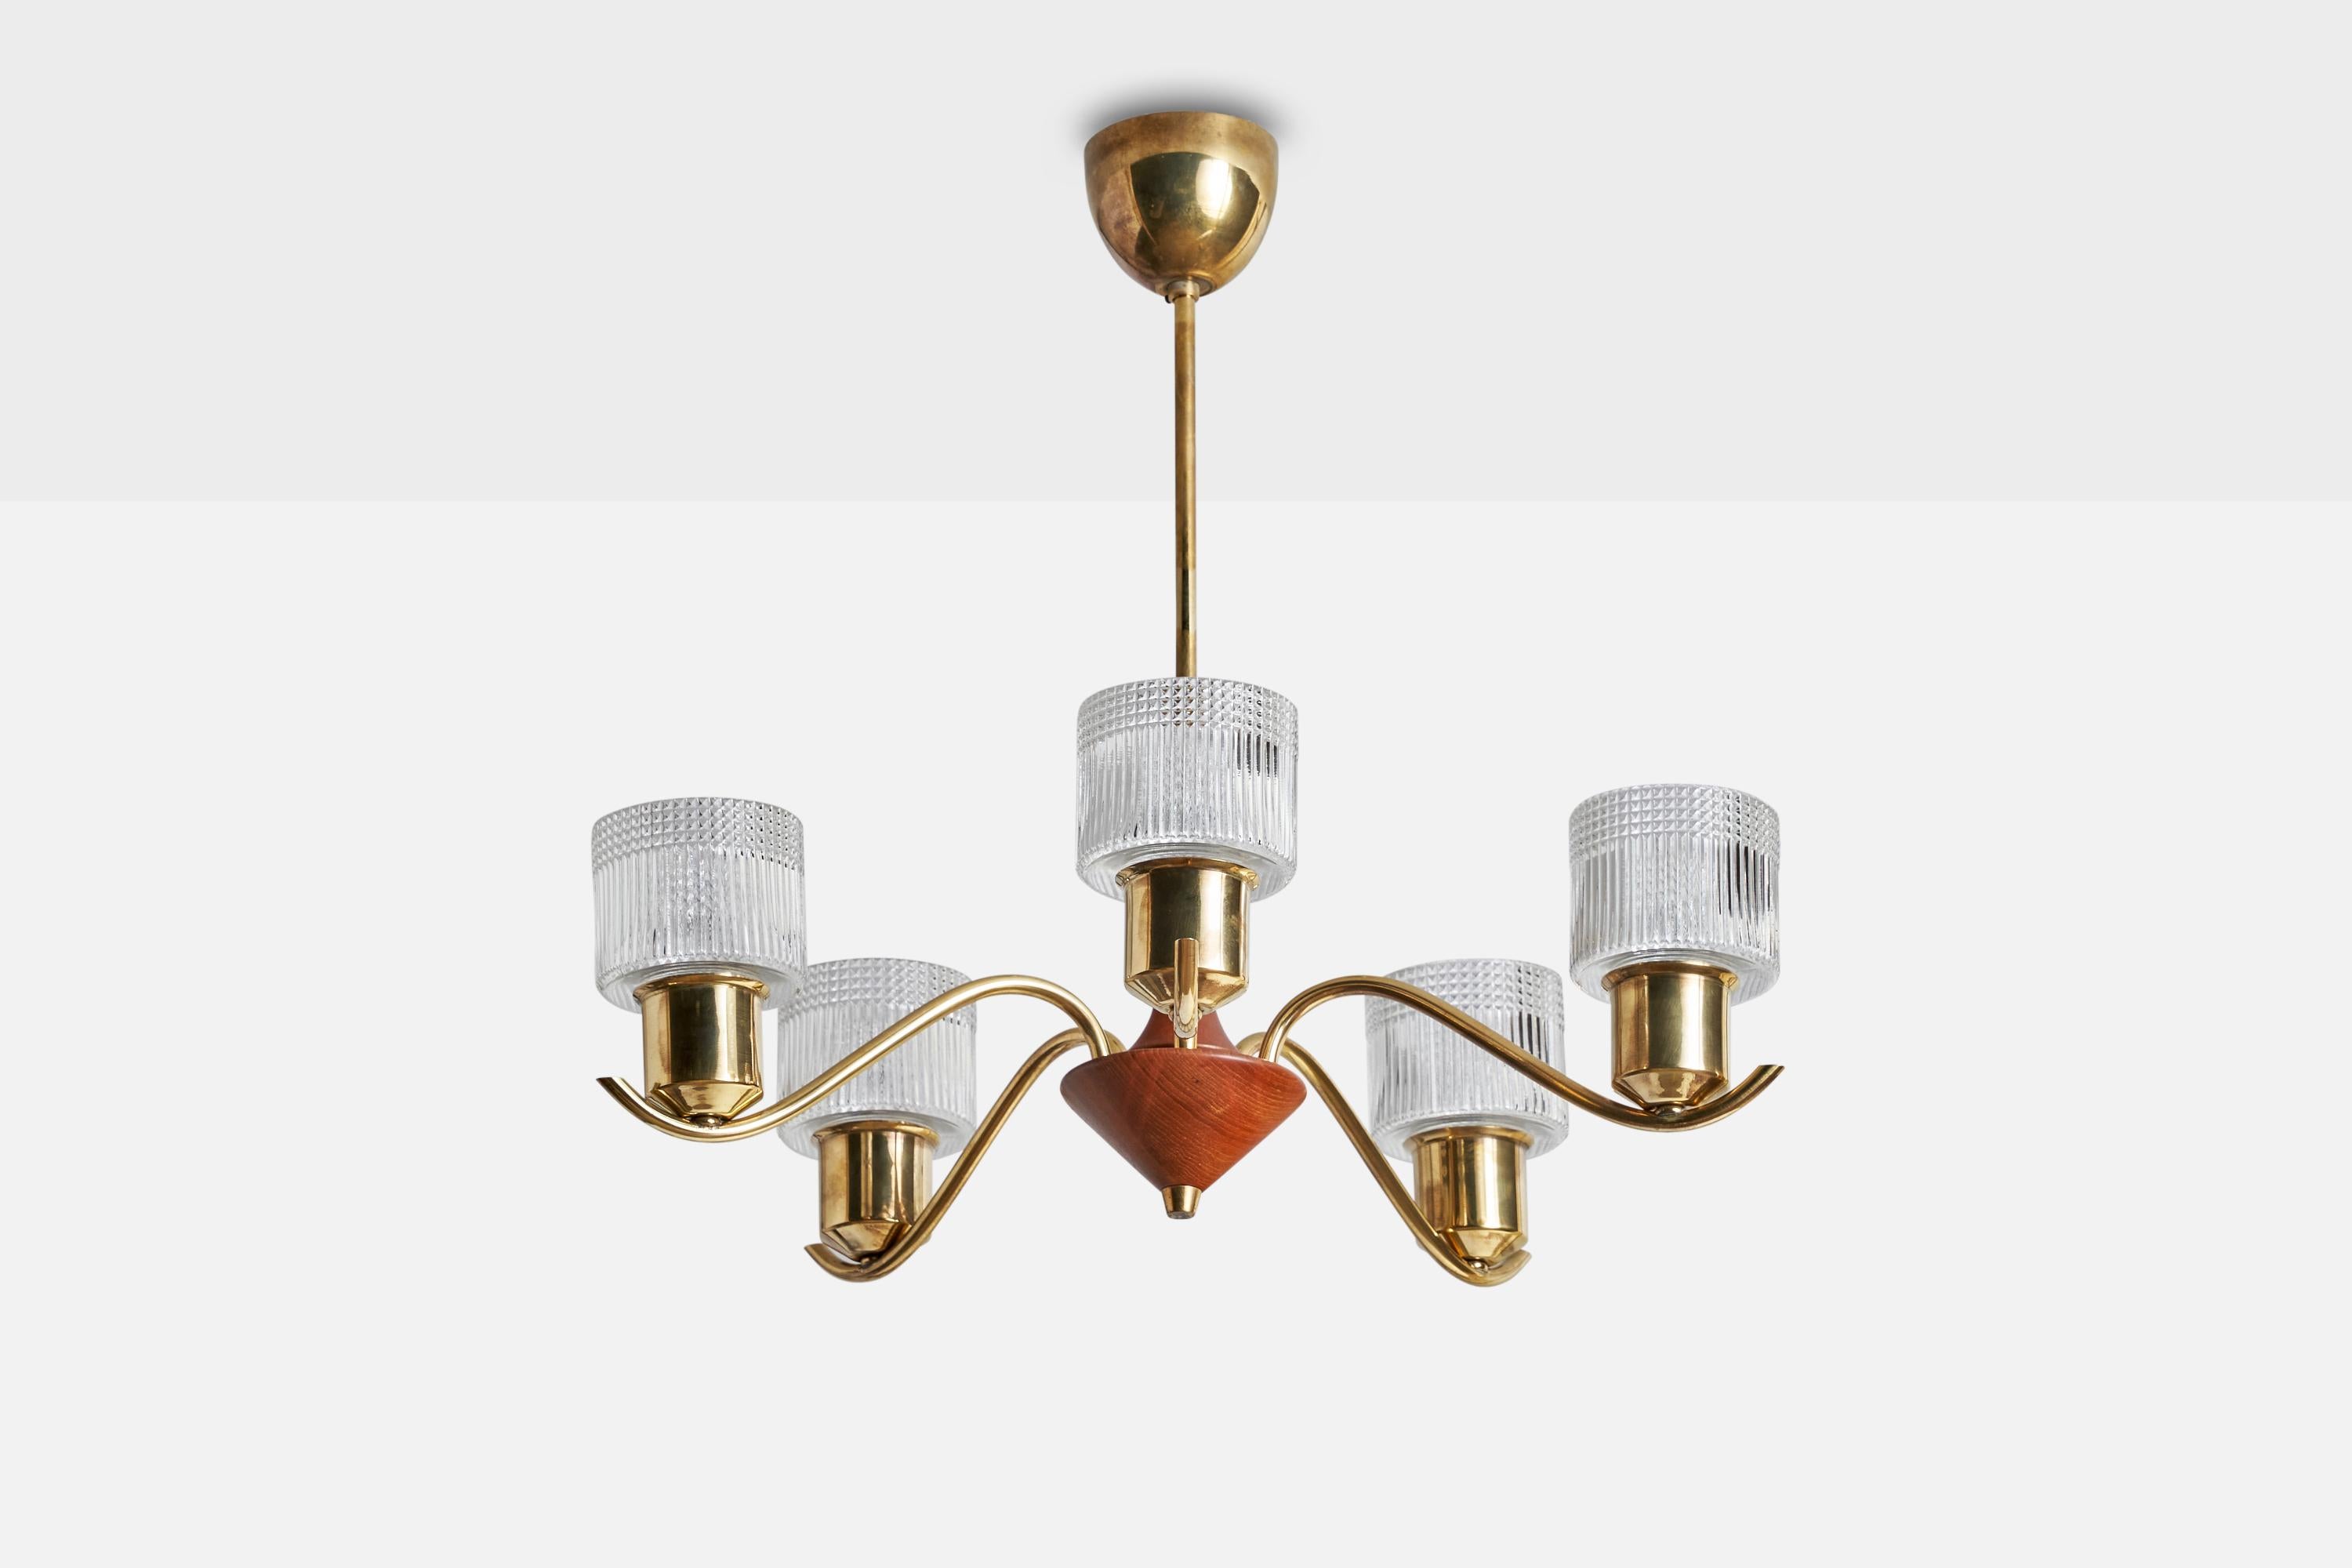 A brass, oak and glass chandelier designed and produced in Sweden, 1950s.

Dimensions of canopy (inches): 2.75” H x 3.25” Diameter
Socket takes standard E-14 bulbs. 5 sockets.There is no maximum wattage stated on the fixture. All lighting will be